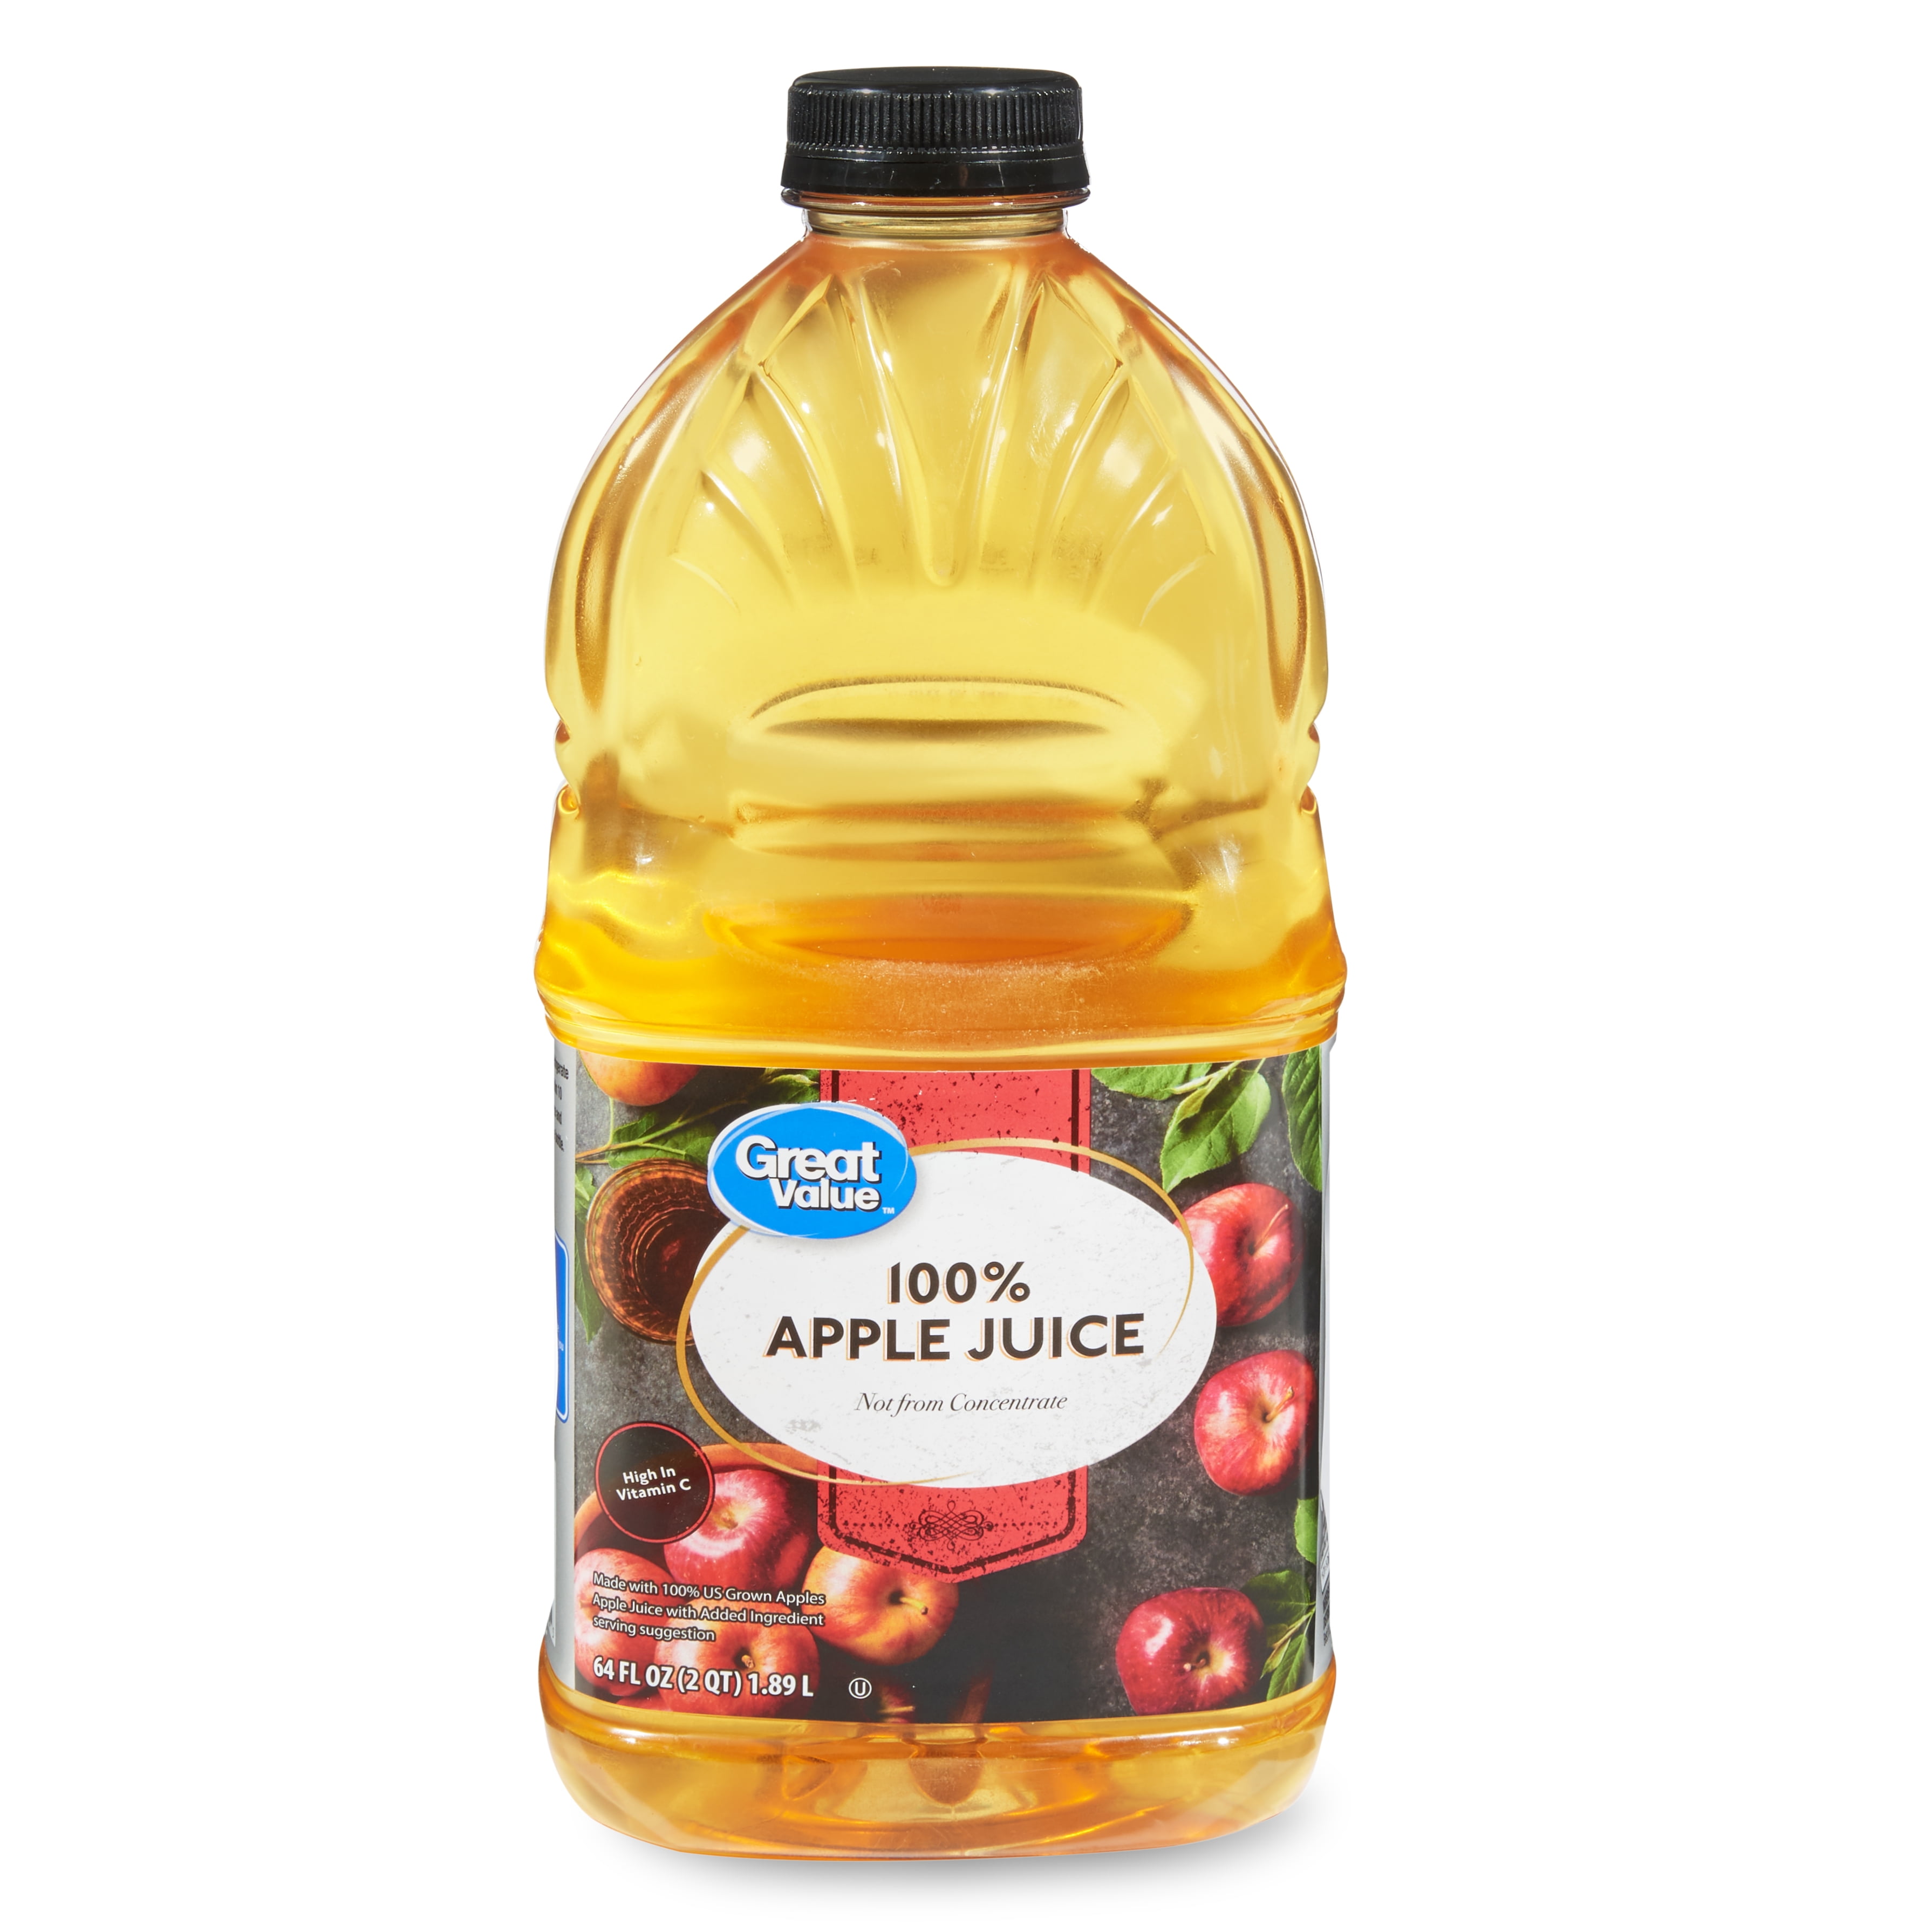 Great Value Not From Concentrate 100% Apple Juice, 64 Fl Oz - Walmart